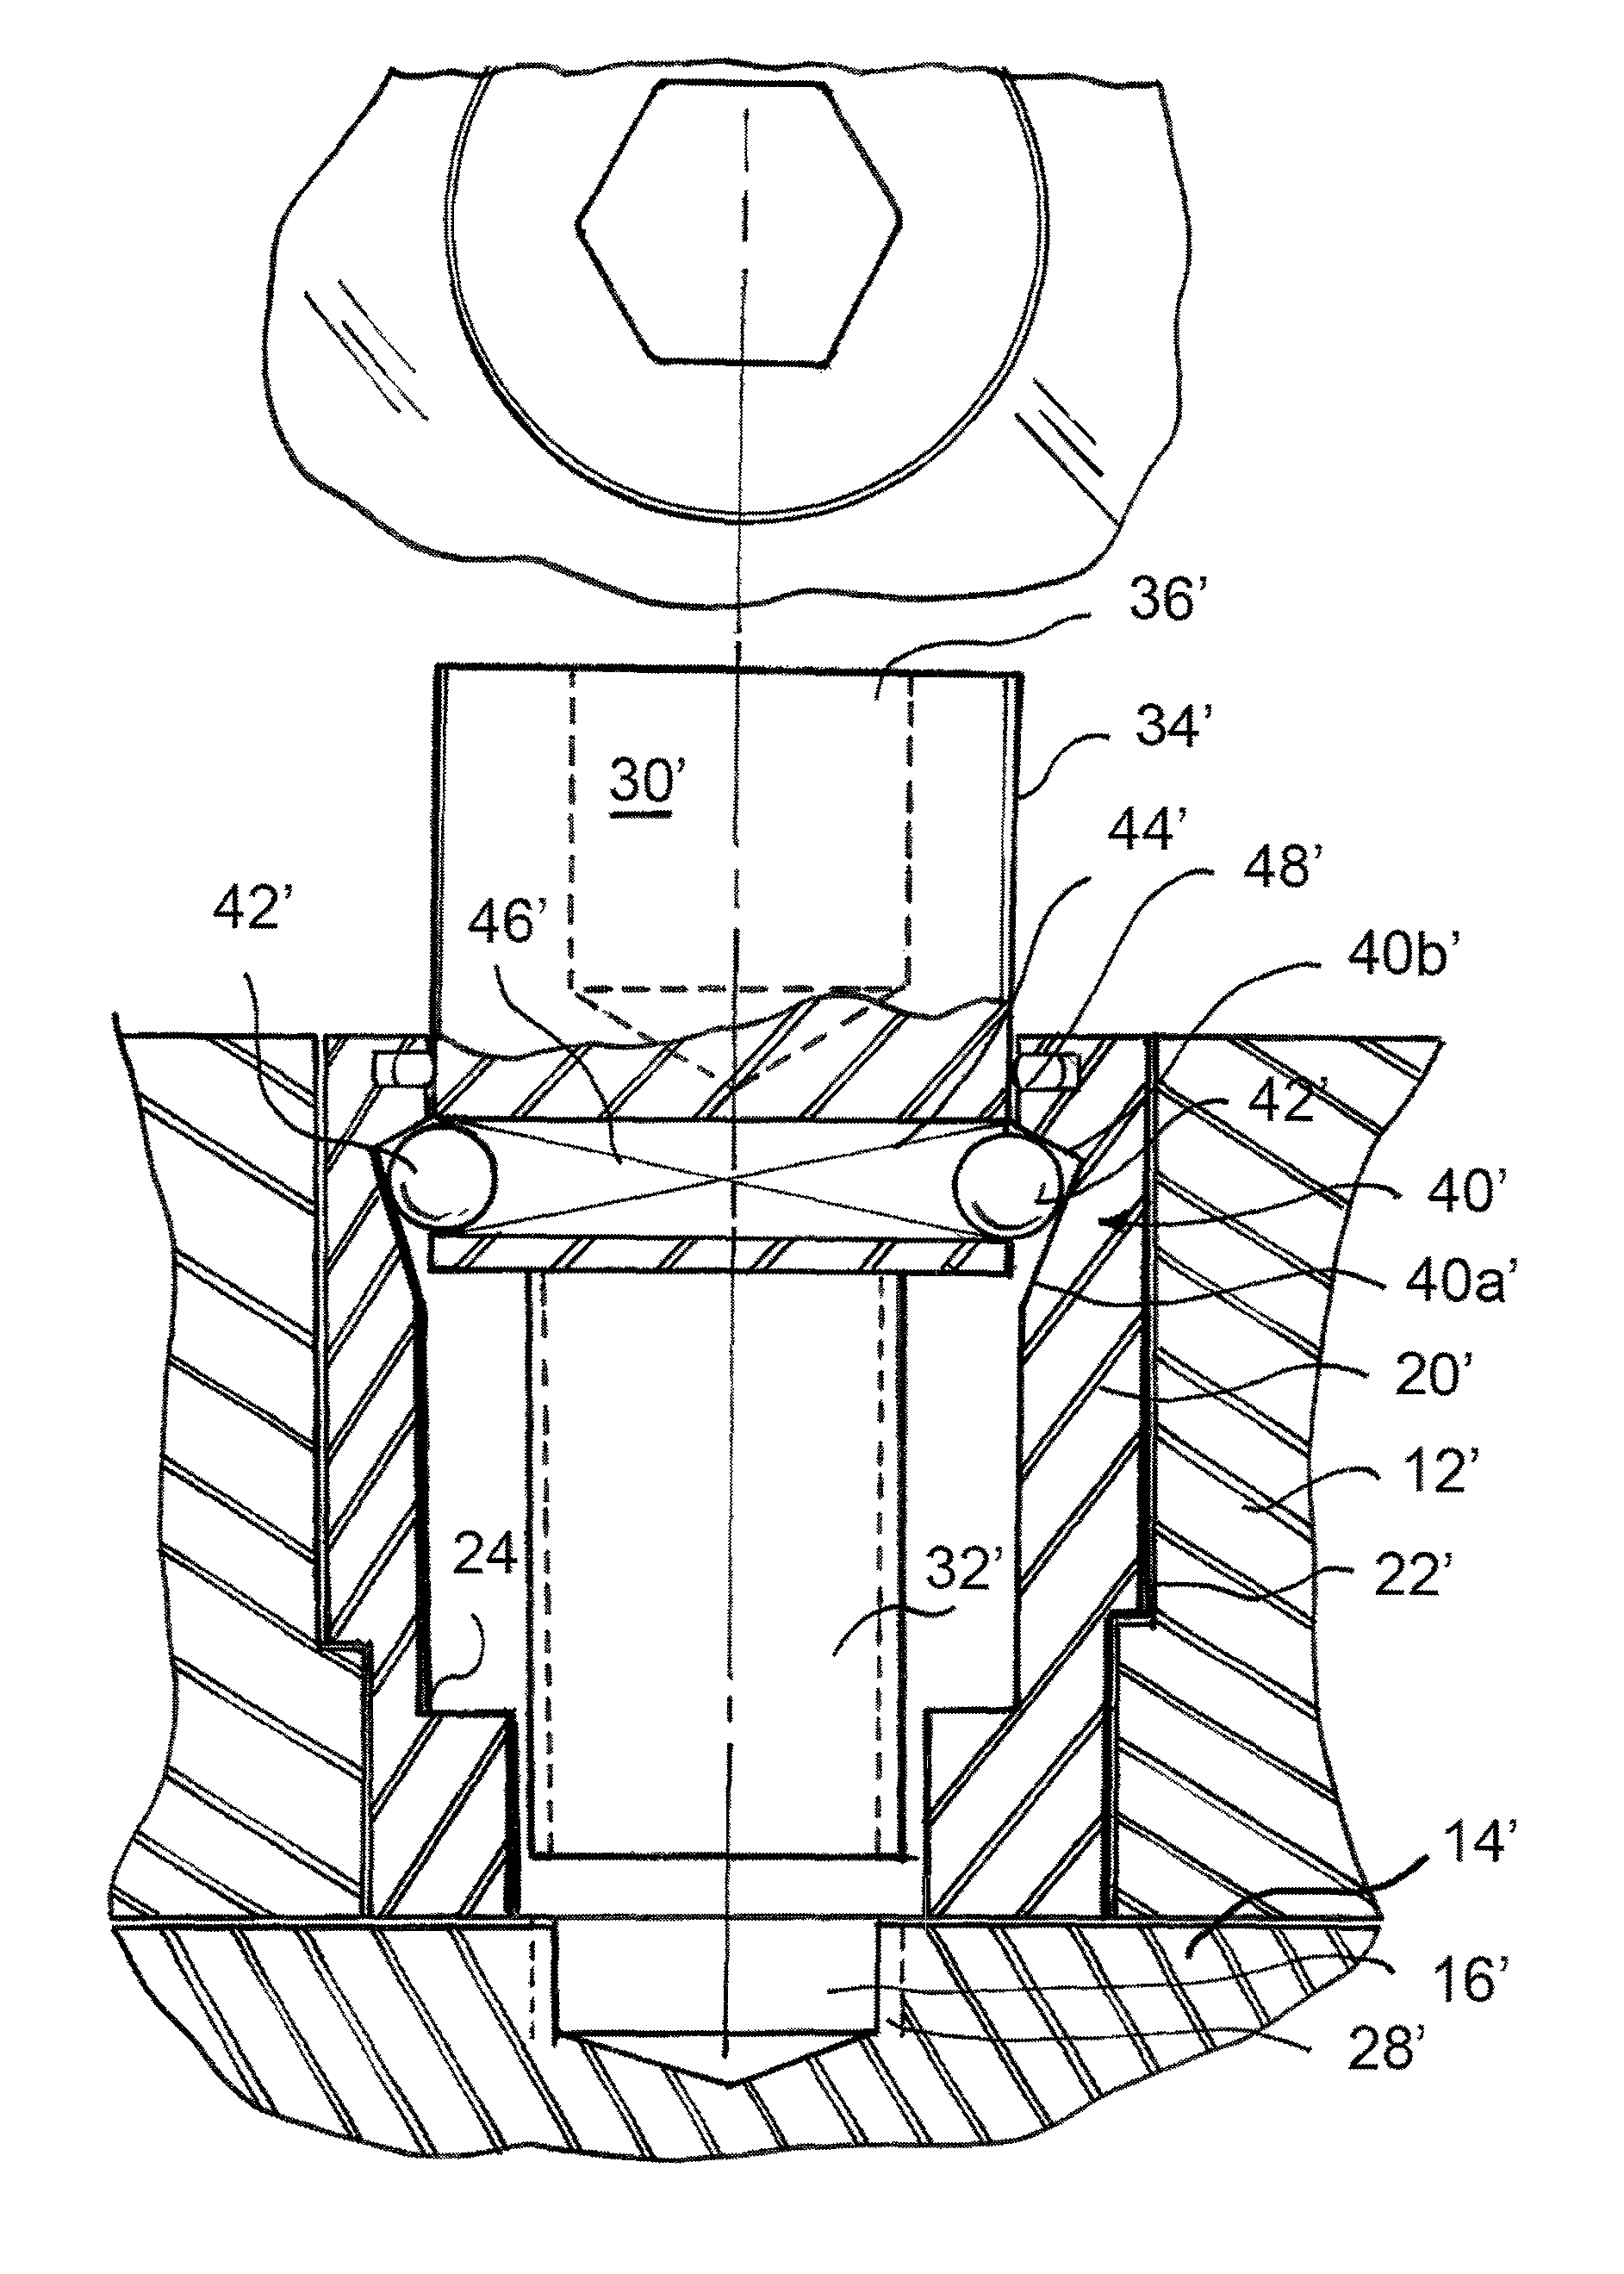 Captured screw assembly